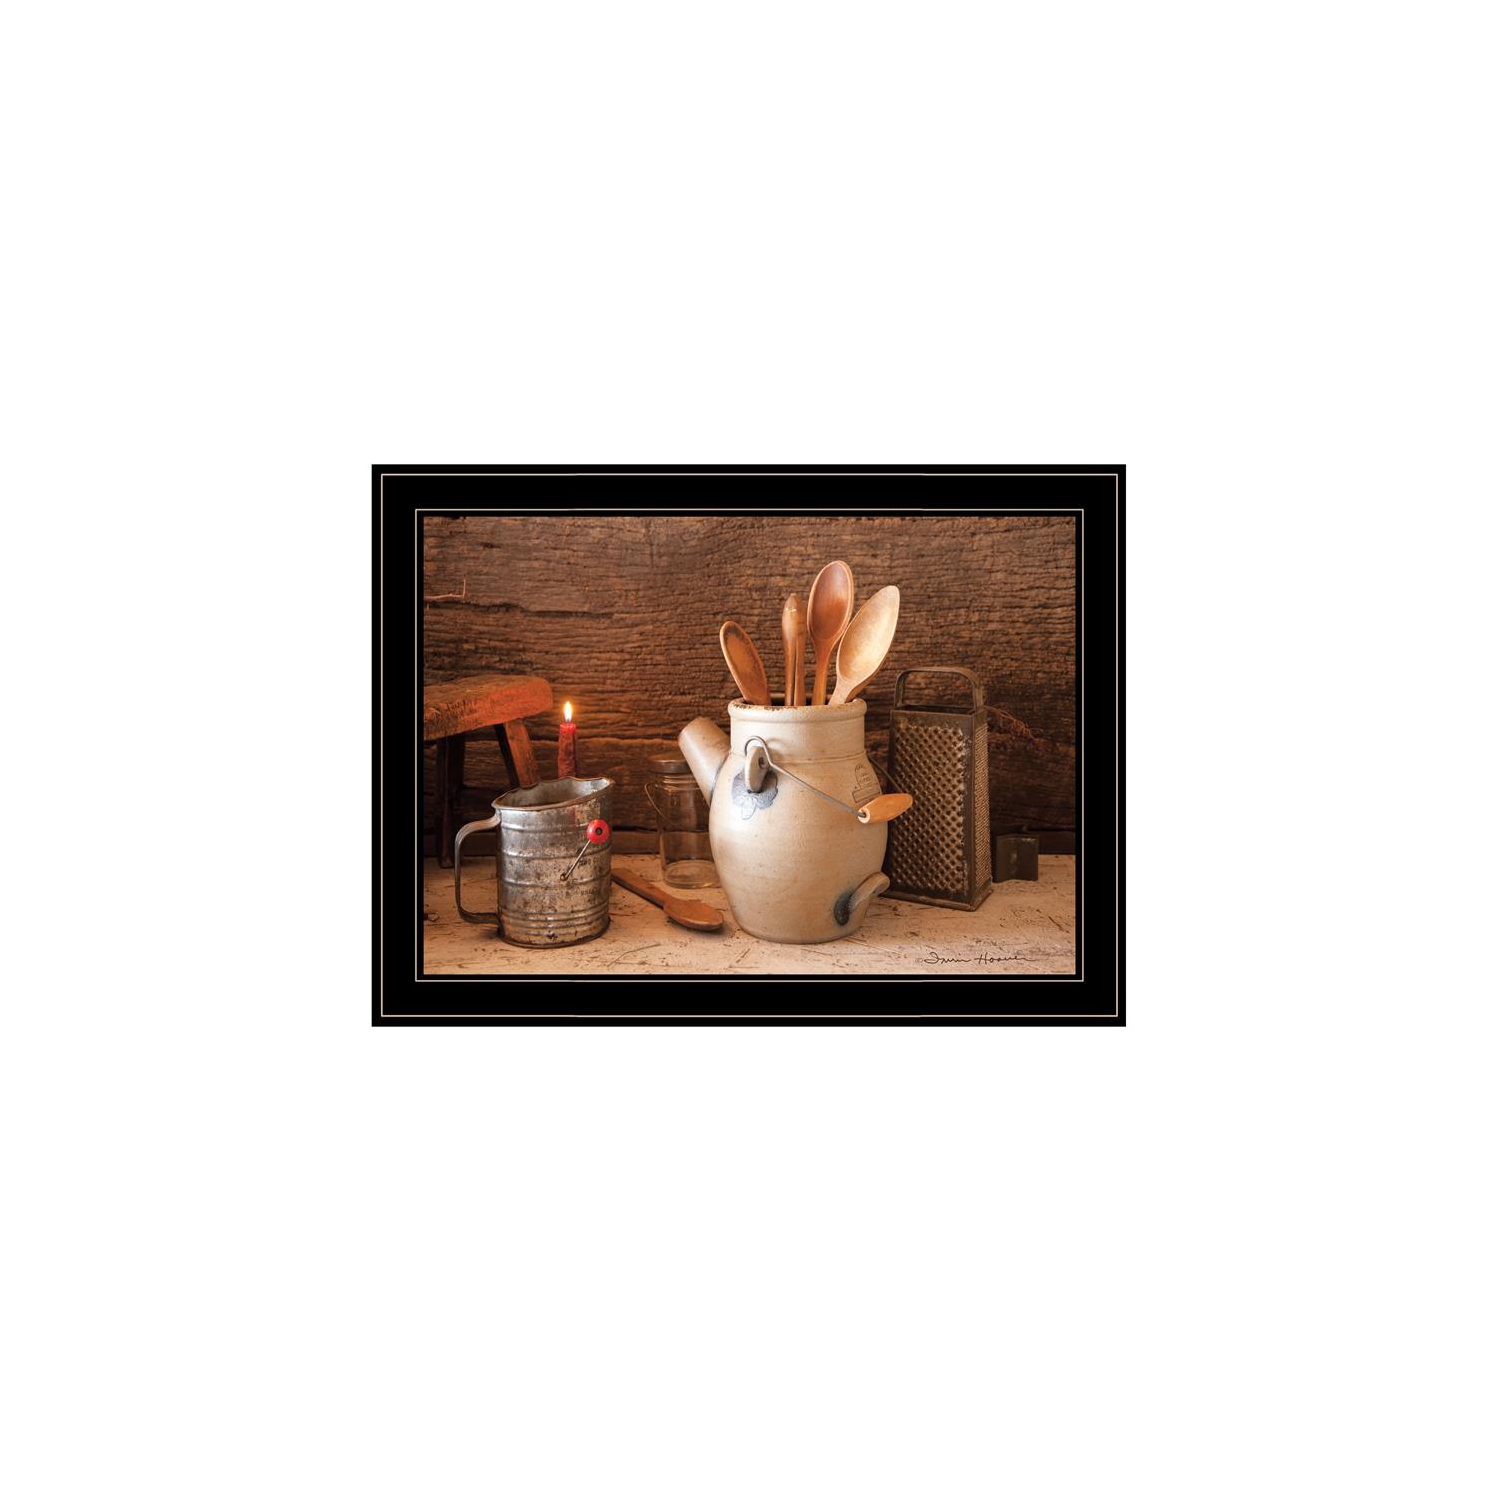 Grandmas Kitchen Tools By Irvin Hoover Printed Wall Art Wood Multi-Color